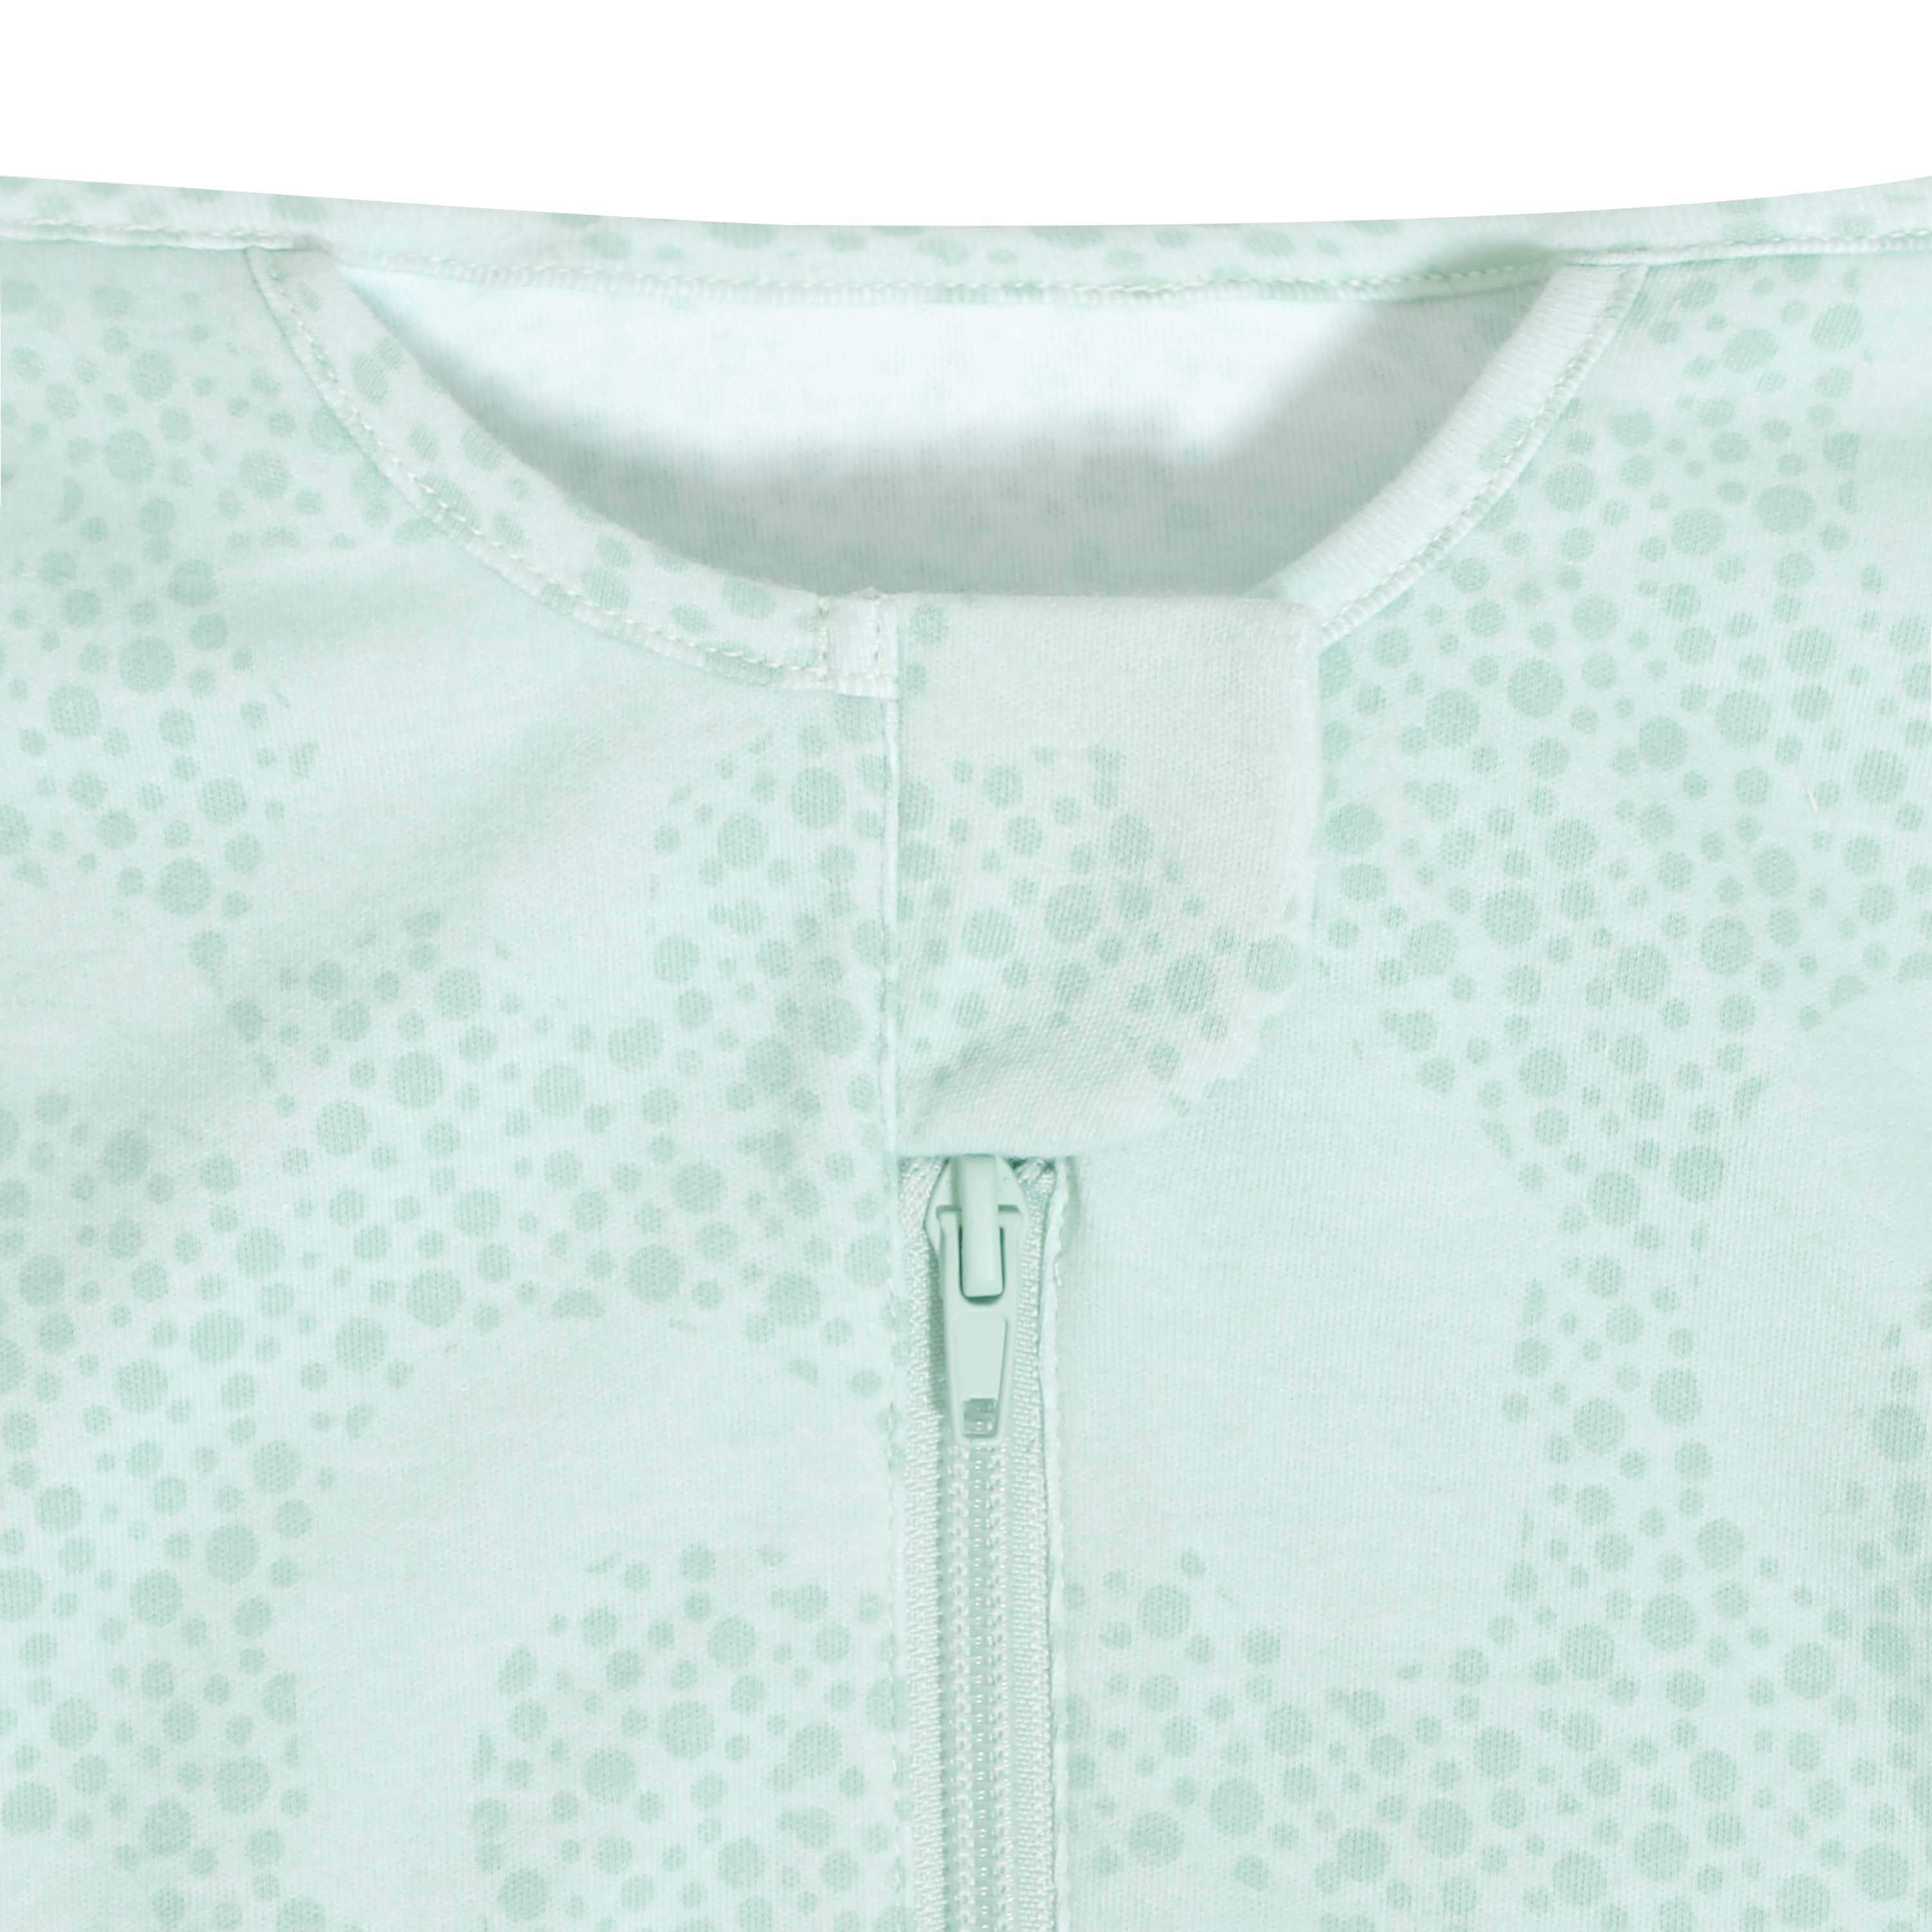 2-in-1 Organic Cotton Zipper Baby Swaddle Up Sack 0.5 TOG - Mint Sky